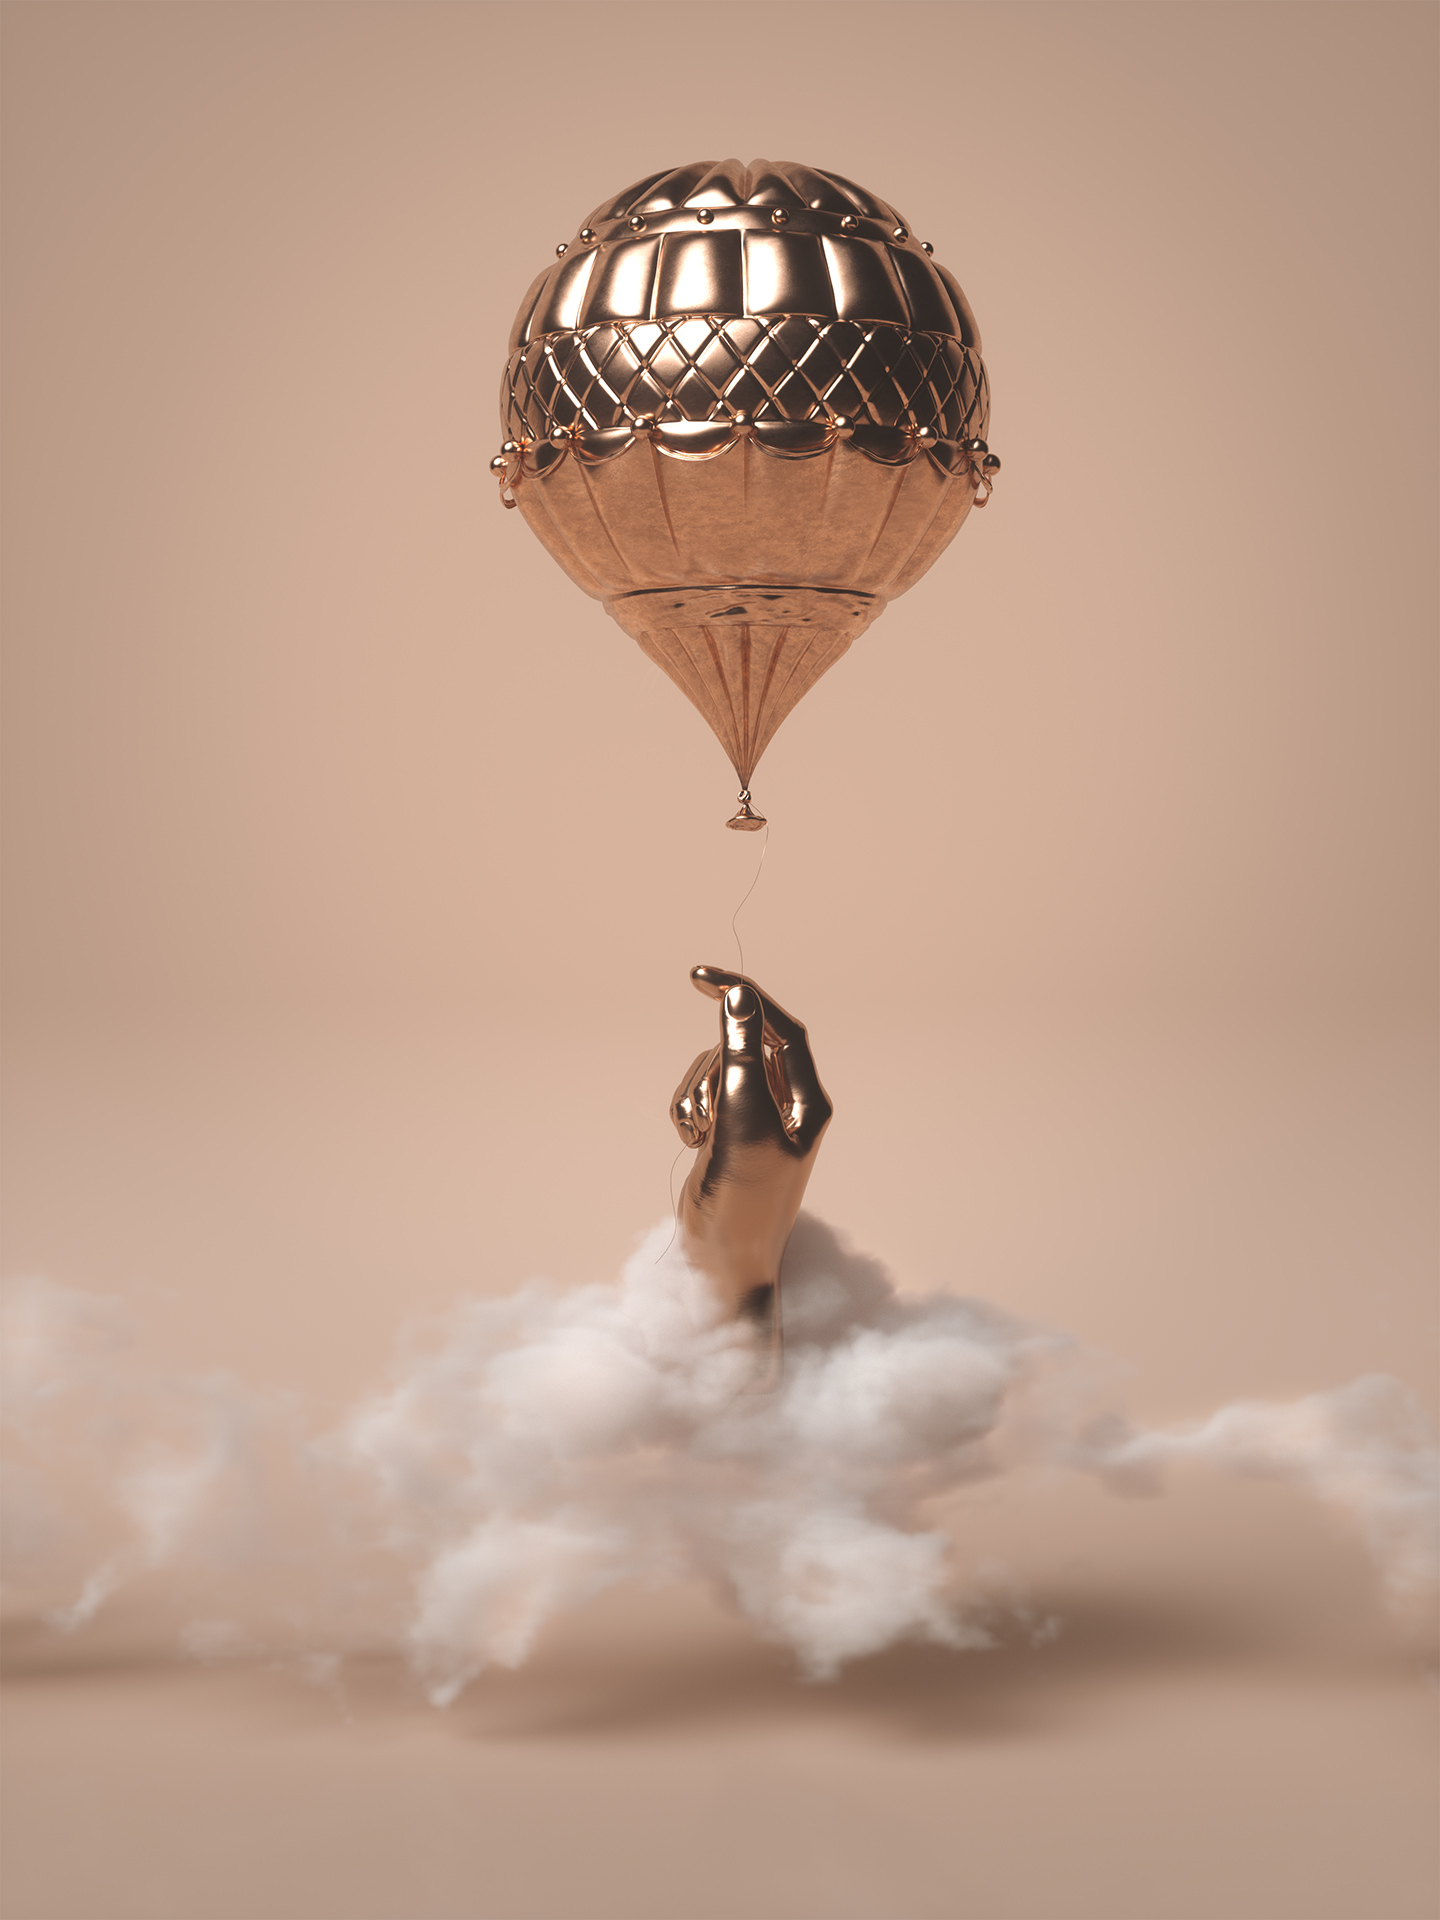 Heavy Thoughts 3D CGI Illustration